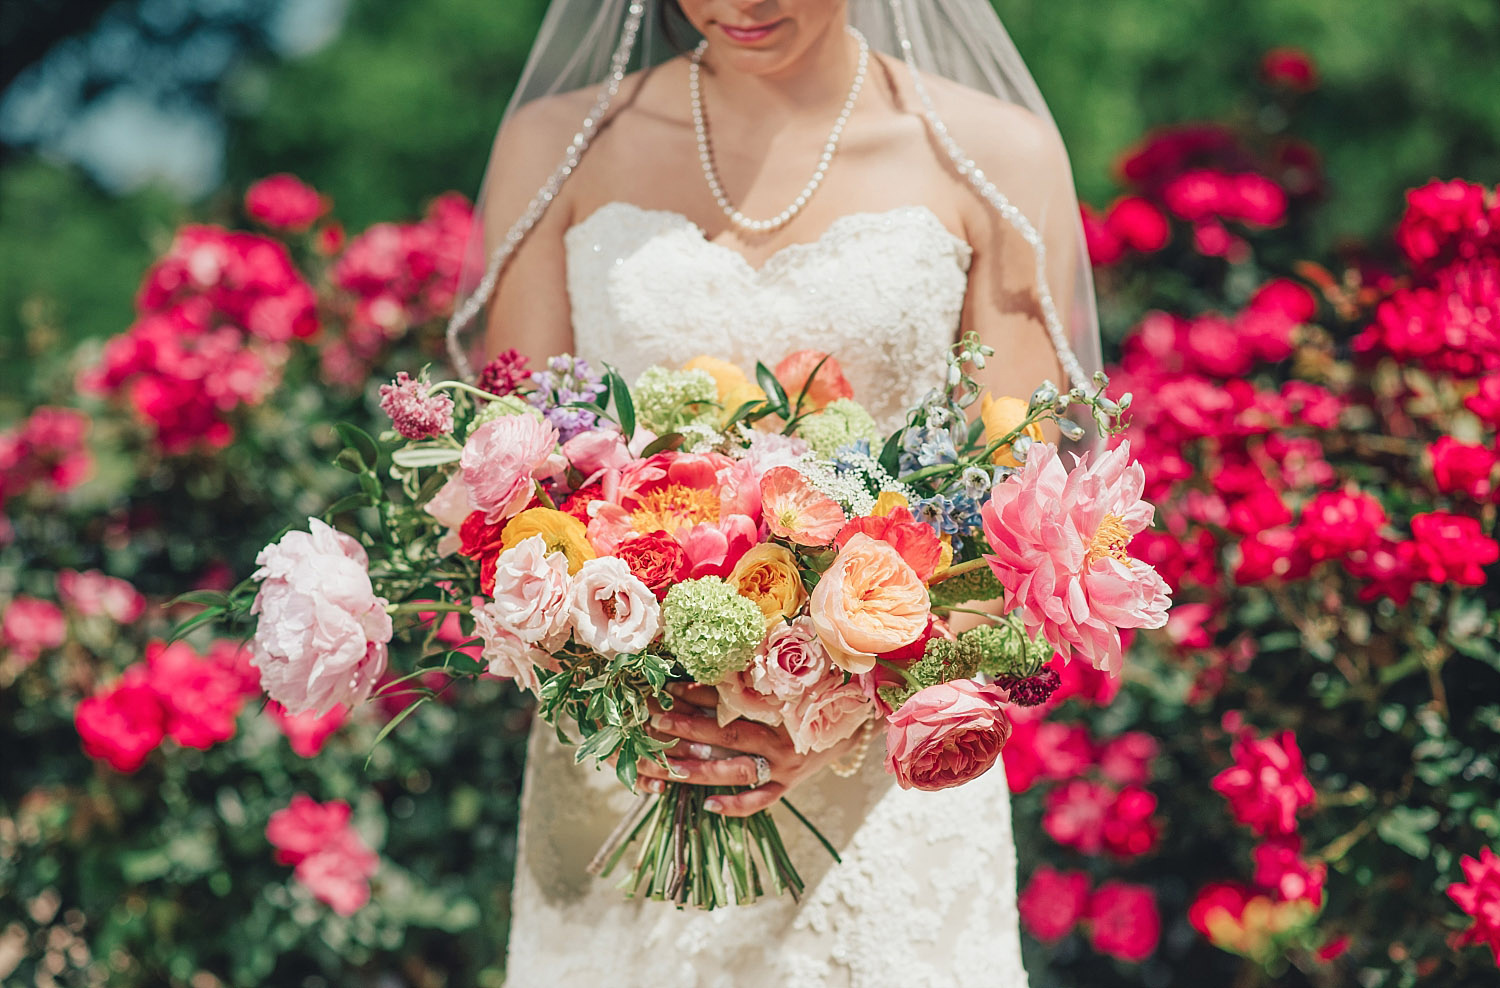 The Orchard Azle wedding bride holding colorful bouquet